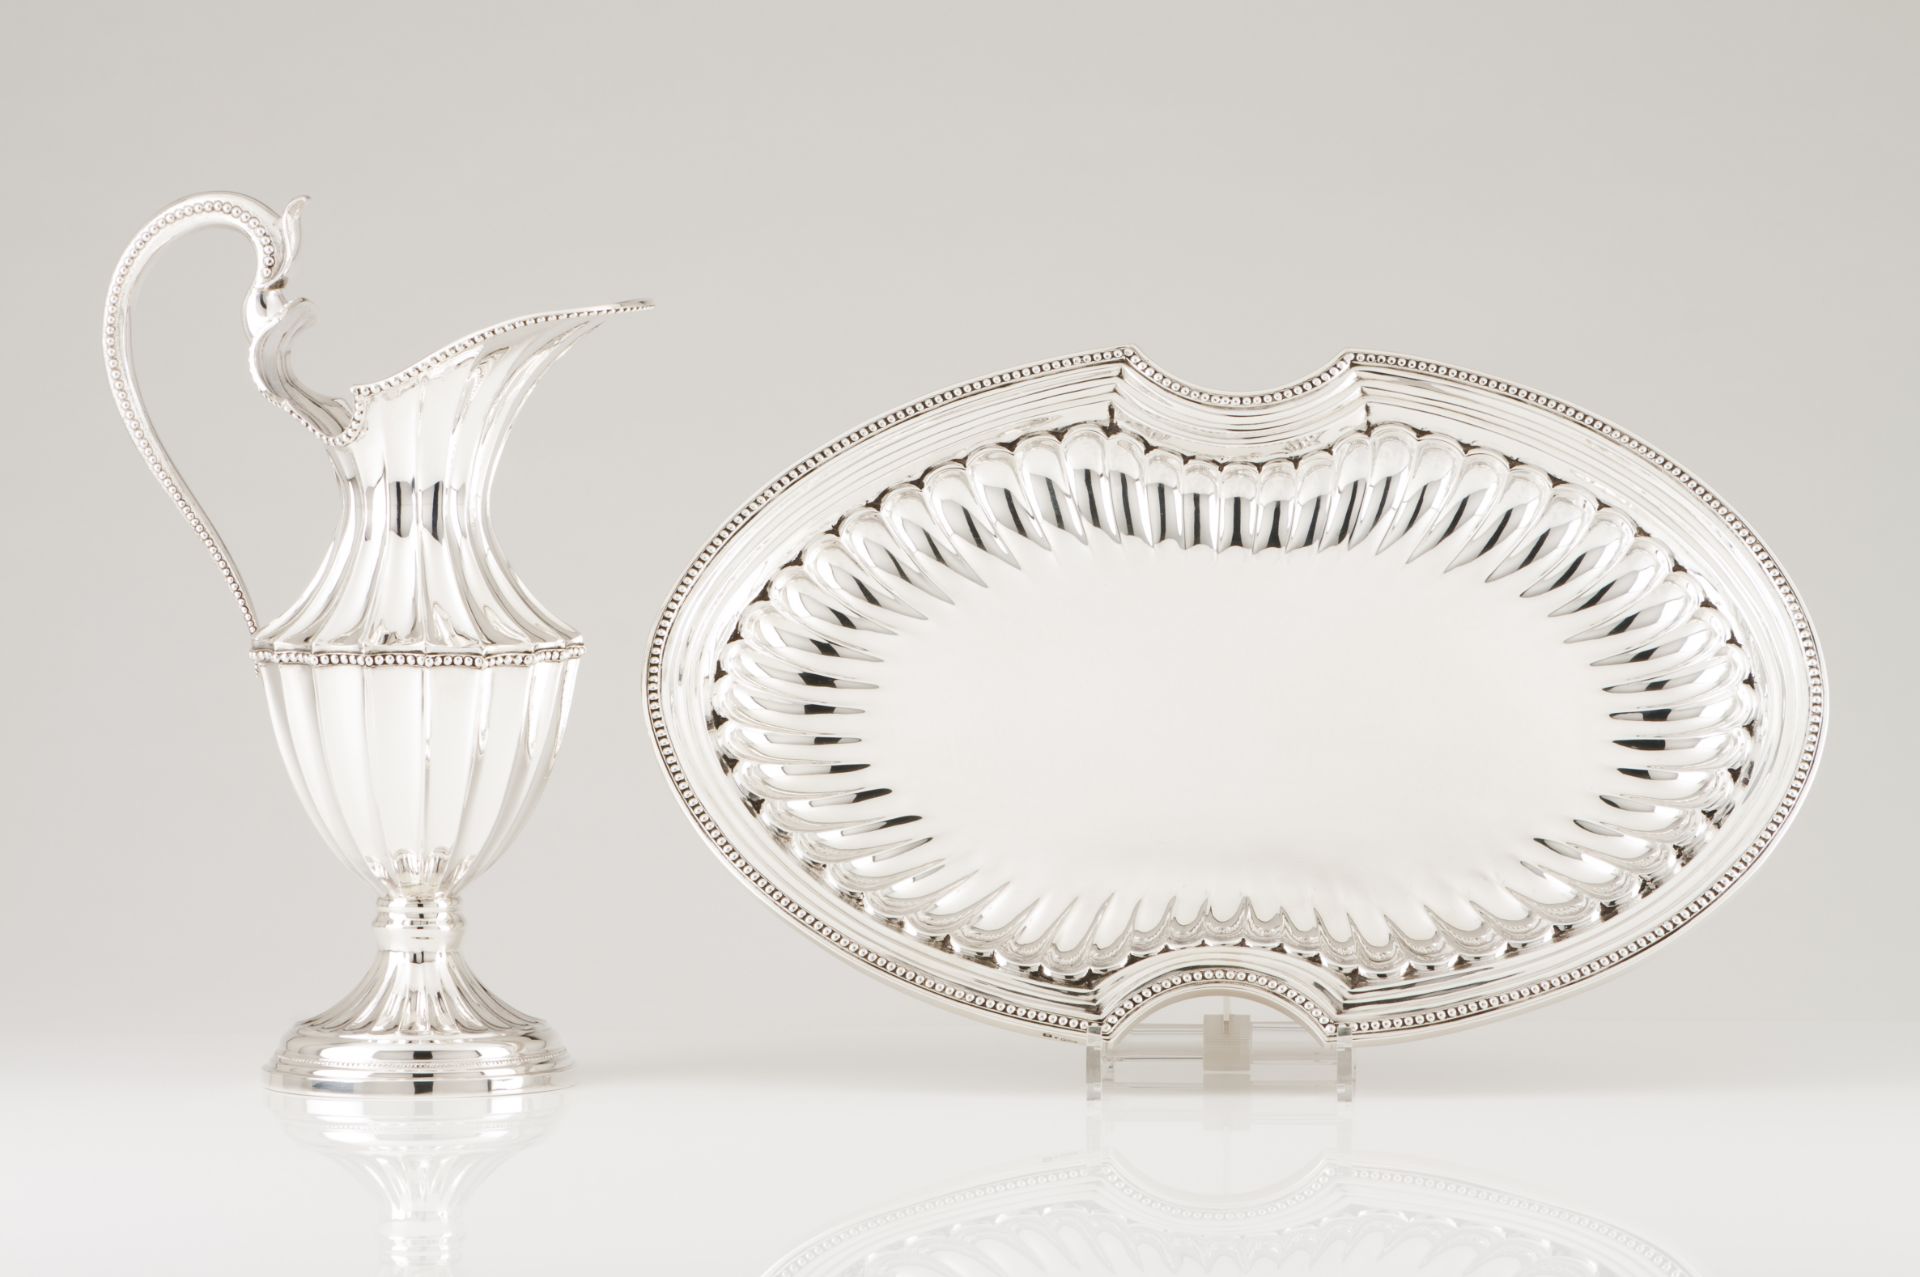 A basin and ewerPortuguese silver D.Maria style decoration of scalloped and inlaid body with